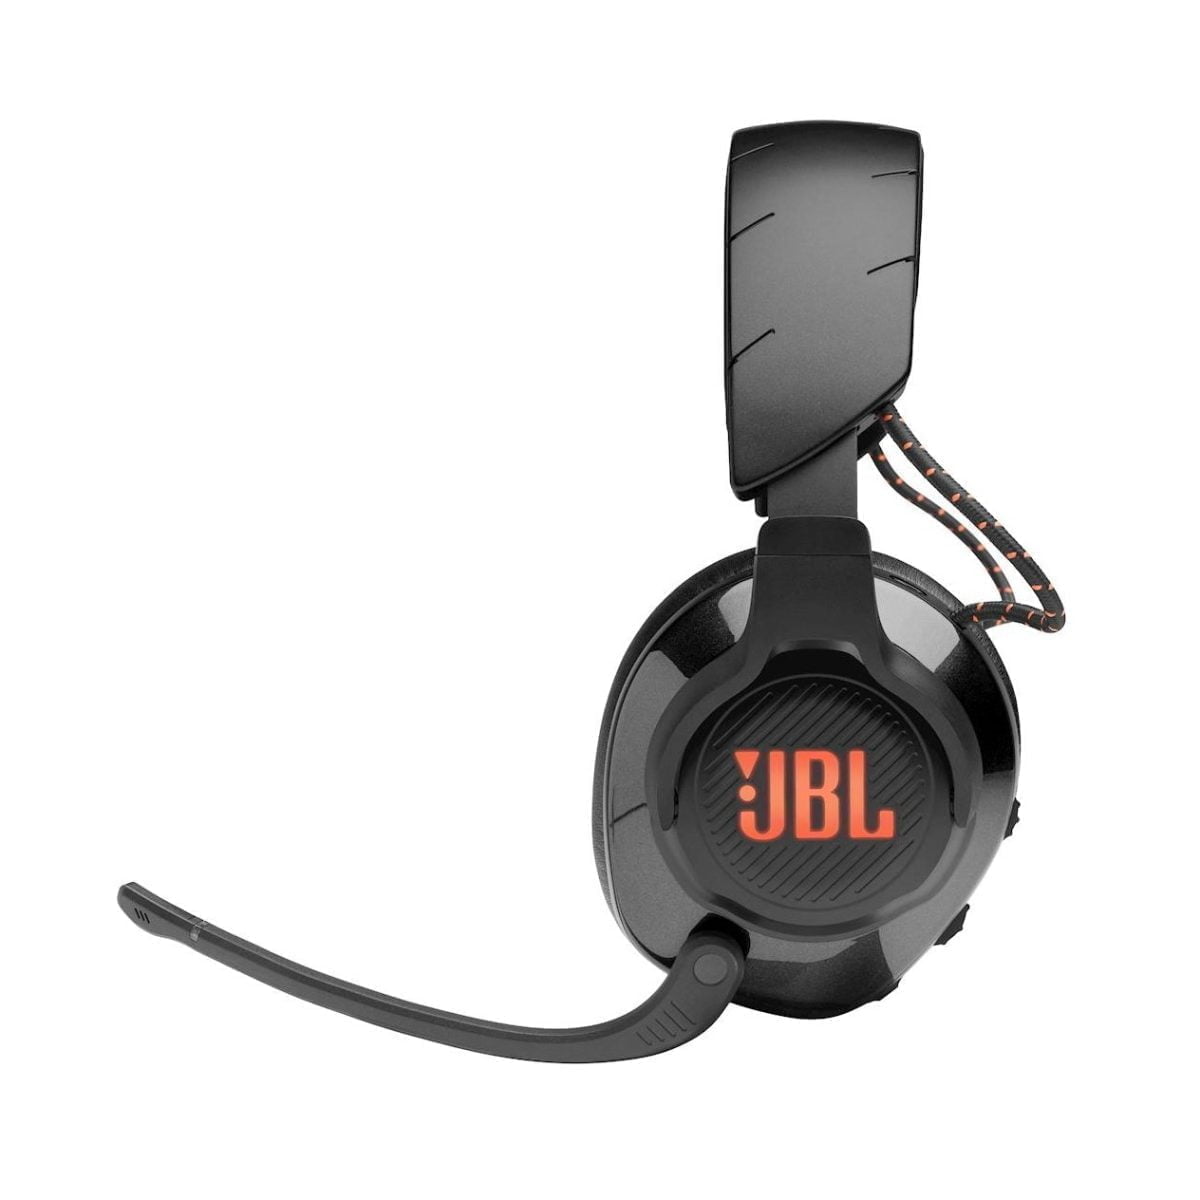 6408577Cv12D Jbl &Lt;H1&Gt;Jbl Quantum 200 Wired Over-Ear Gaming Headset With Flip-Up Mic&Lt;/H1&Gt; Https://Www.youtube.com/Watch?V=E3Fiycdl7De Turn Your Game Into An Epic Event. Featuring Jbl Quantumsound Signature, The Jbl Quantum 200 Headset Puts You Right In The Middle Of The Action. Immersive And Accurate, So That You Can Hear Even The Tiniest Details, The Jbl Quantum 200 Equips You With All You Need To Own Every Battle. Jbl Quantum Jbl Quantum 200 Wired Over-Ear Gaming Headset With Flip-Up Mic